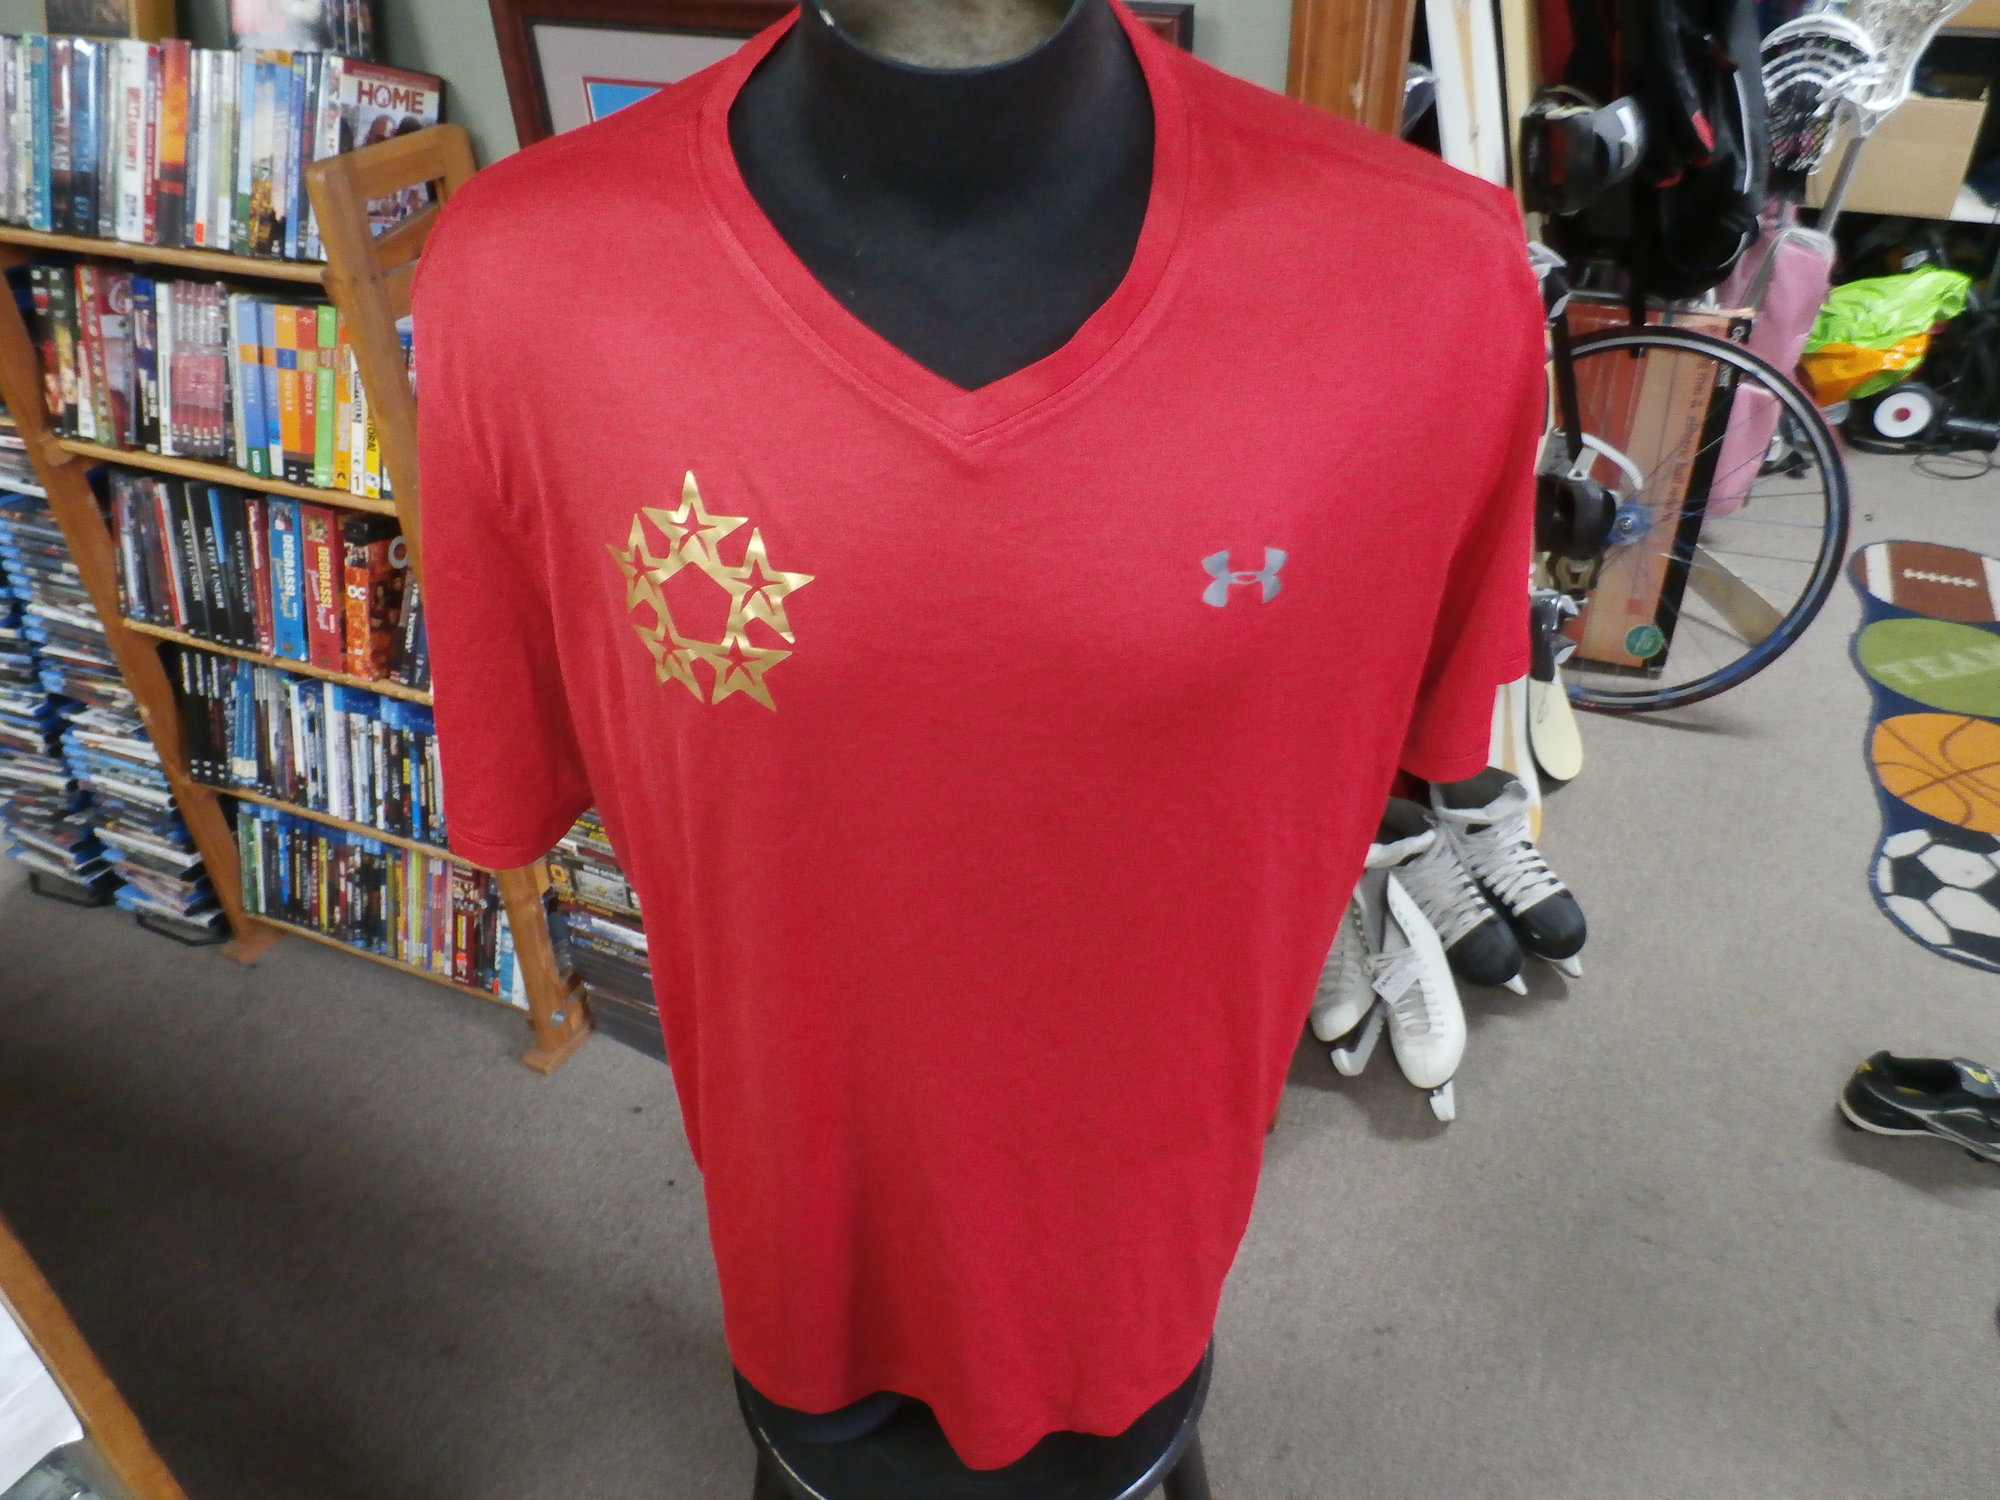 Florida Generals Under Armour red shirt size 2XL 100% polyester #26993
Rating: (see below) 4- Fair Condition
Team: Florida Generals
Player: Frank Hughes
Brand: Under Armour
Size: Men's XXLarge- (Measured Flat: chest 26\", length 30\")
Color: red
Style: short sleeve; screen printed
Material: 100% polyester
Condition: 4- Fair Condition: material stretched from use and washing; large square of faded material on front (see photos)
Item #: 26993
Shipping: FREE